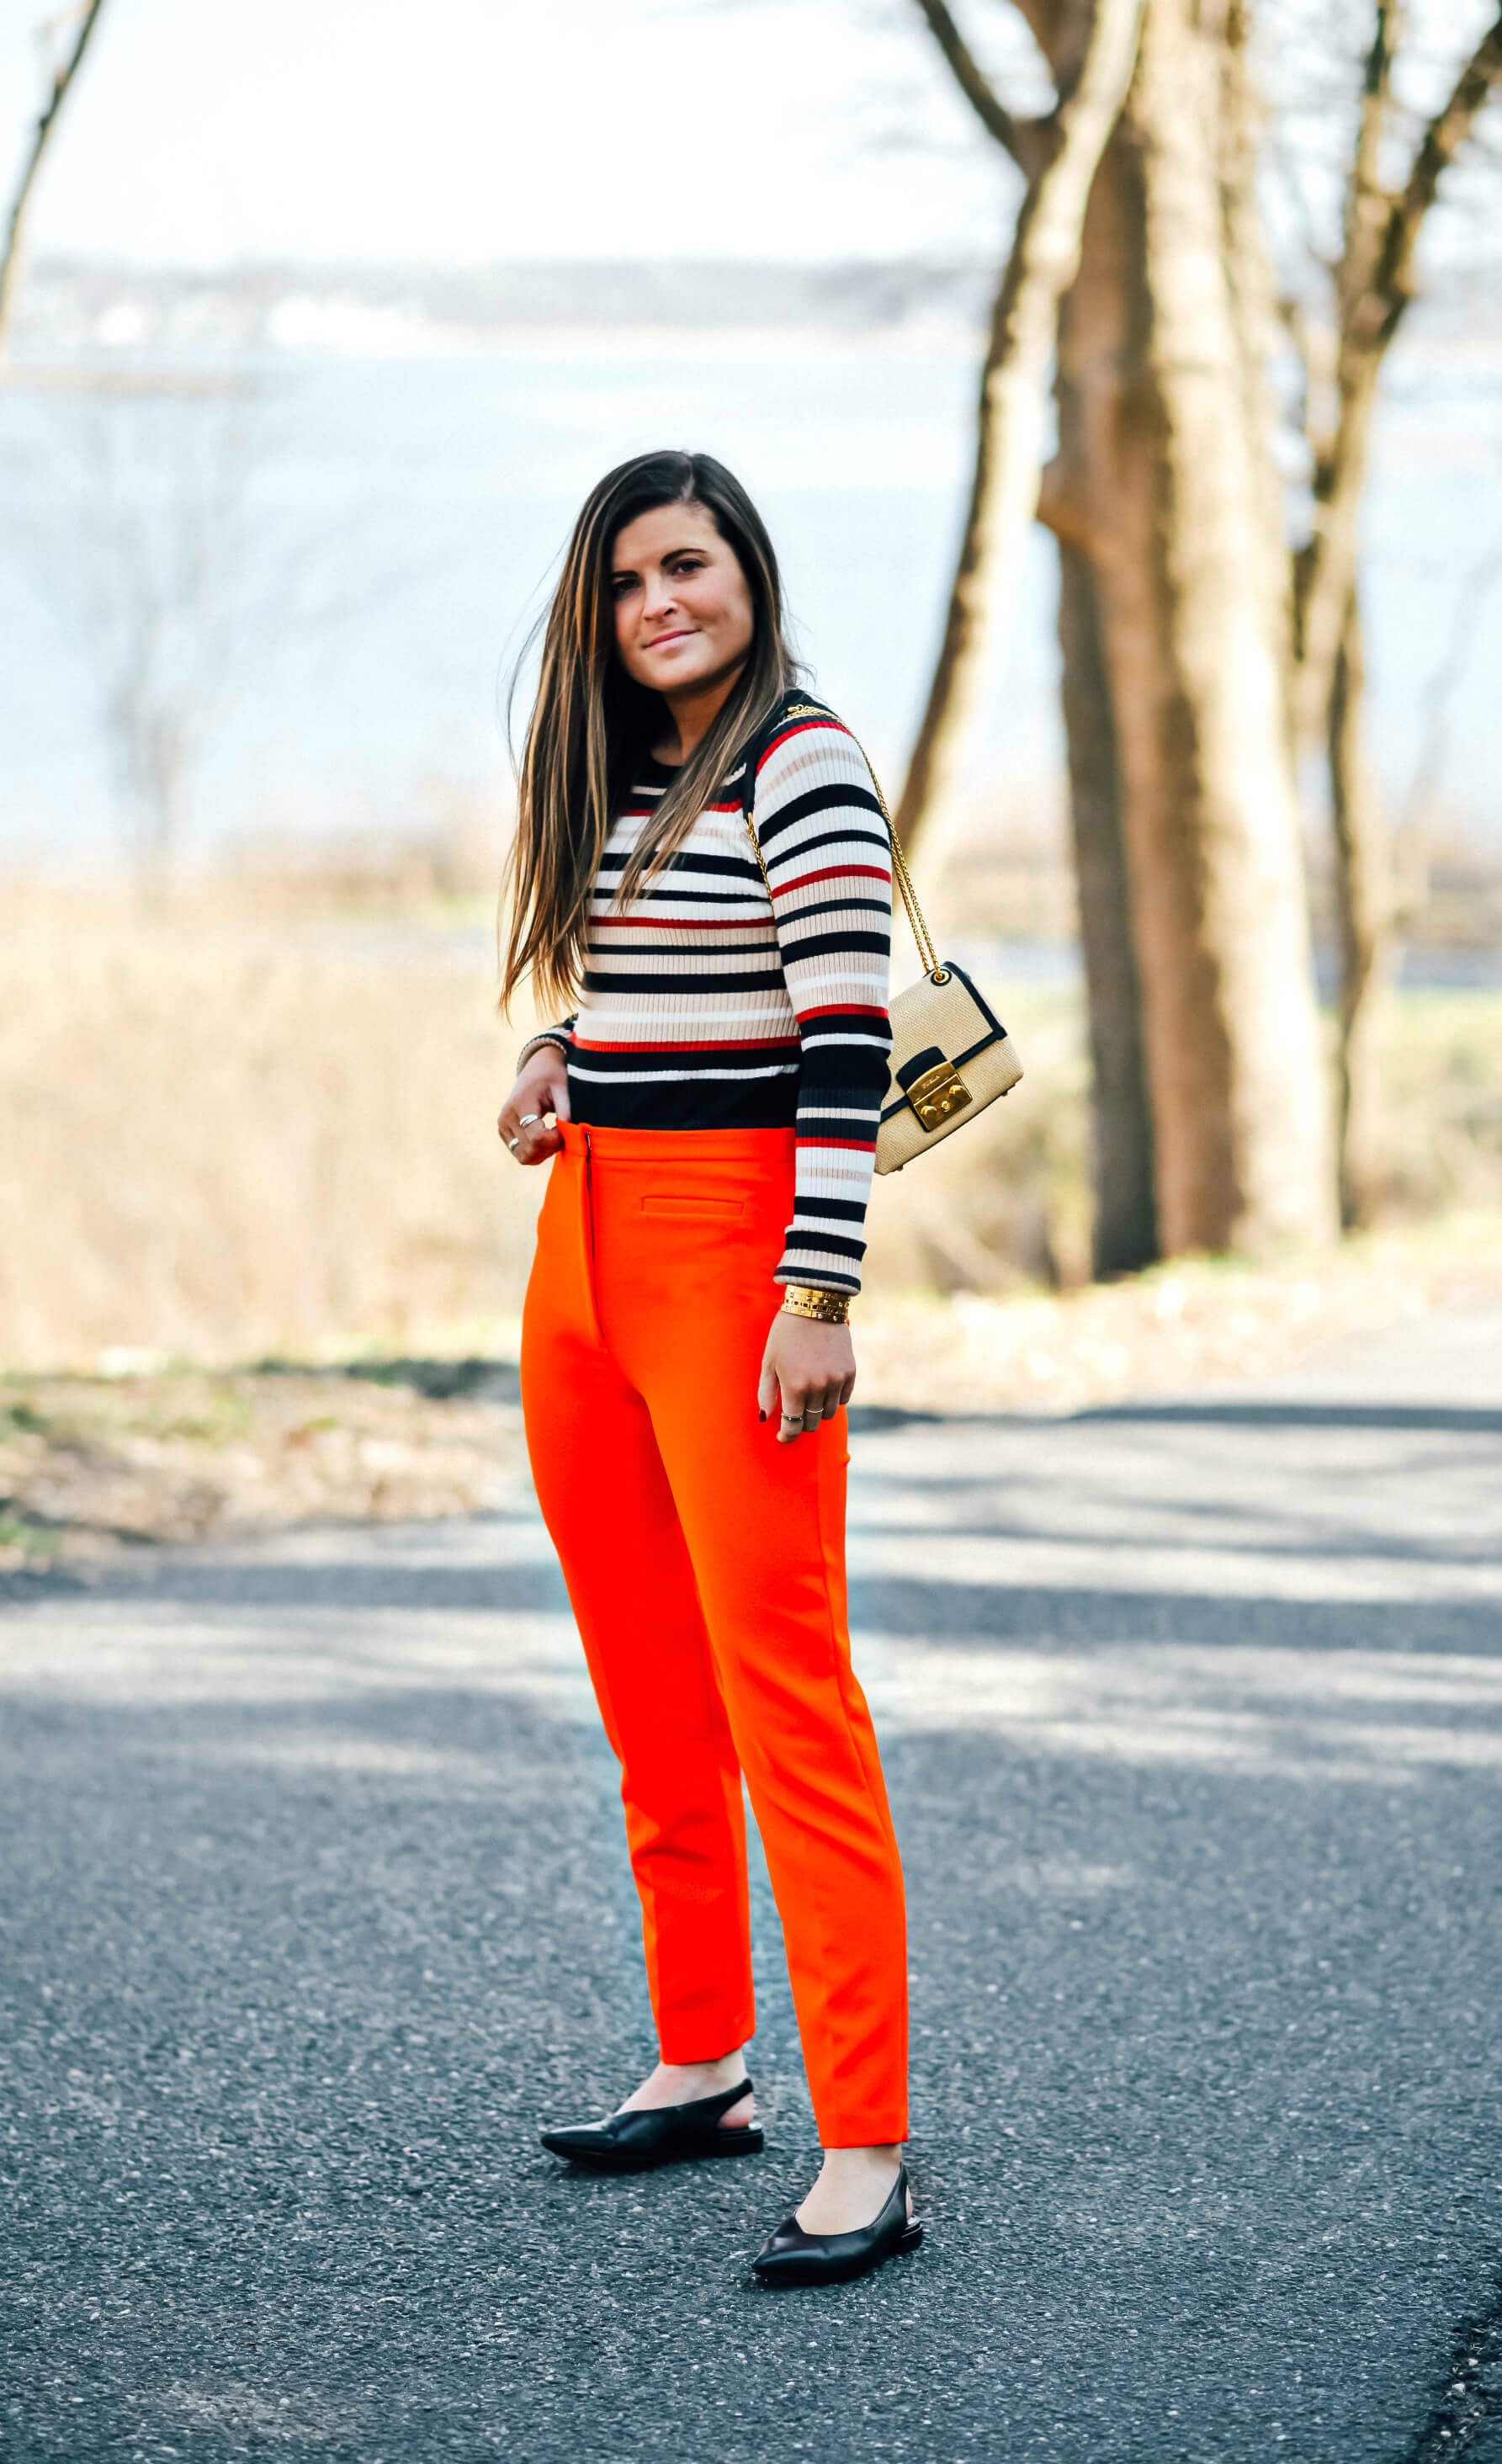 Milly Skinny High Waisted Red Pant, Striped Knit Sweater Top, Furla Metropolis Basket Weave Straw Crossbody Bag, Sam Edelman Black Slingback Flats, Business Casual Outfit, Spring Business Casual Outfit, Pop of Color Work Outfit, Tilden of To Be Bright